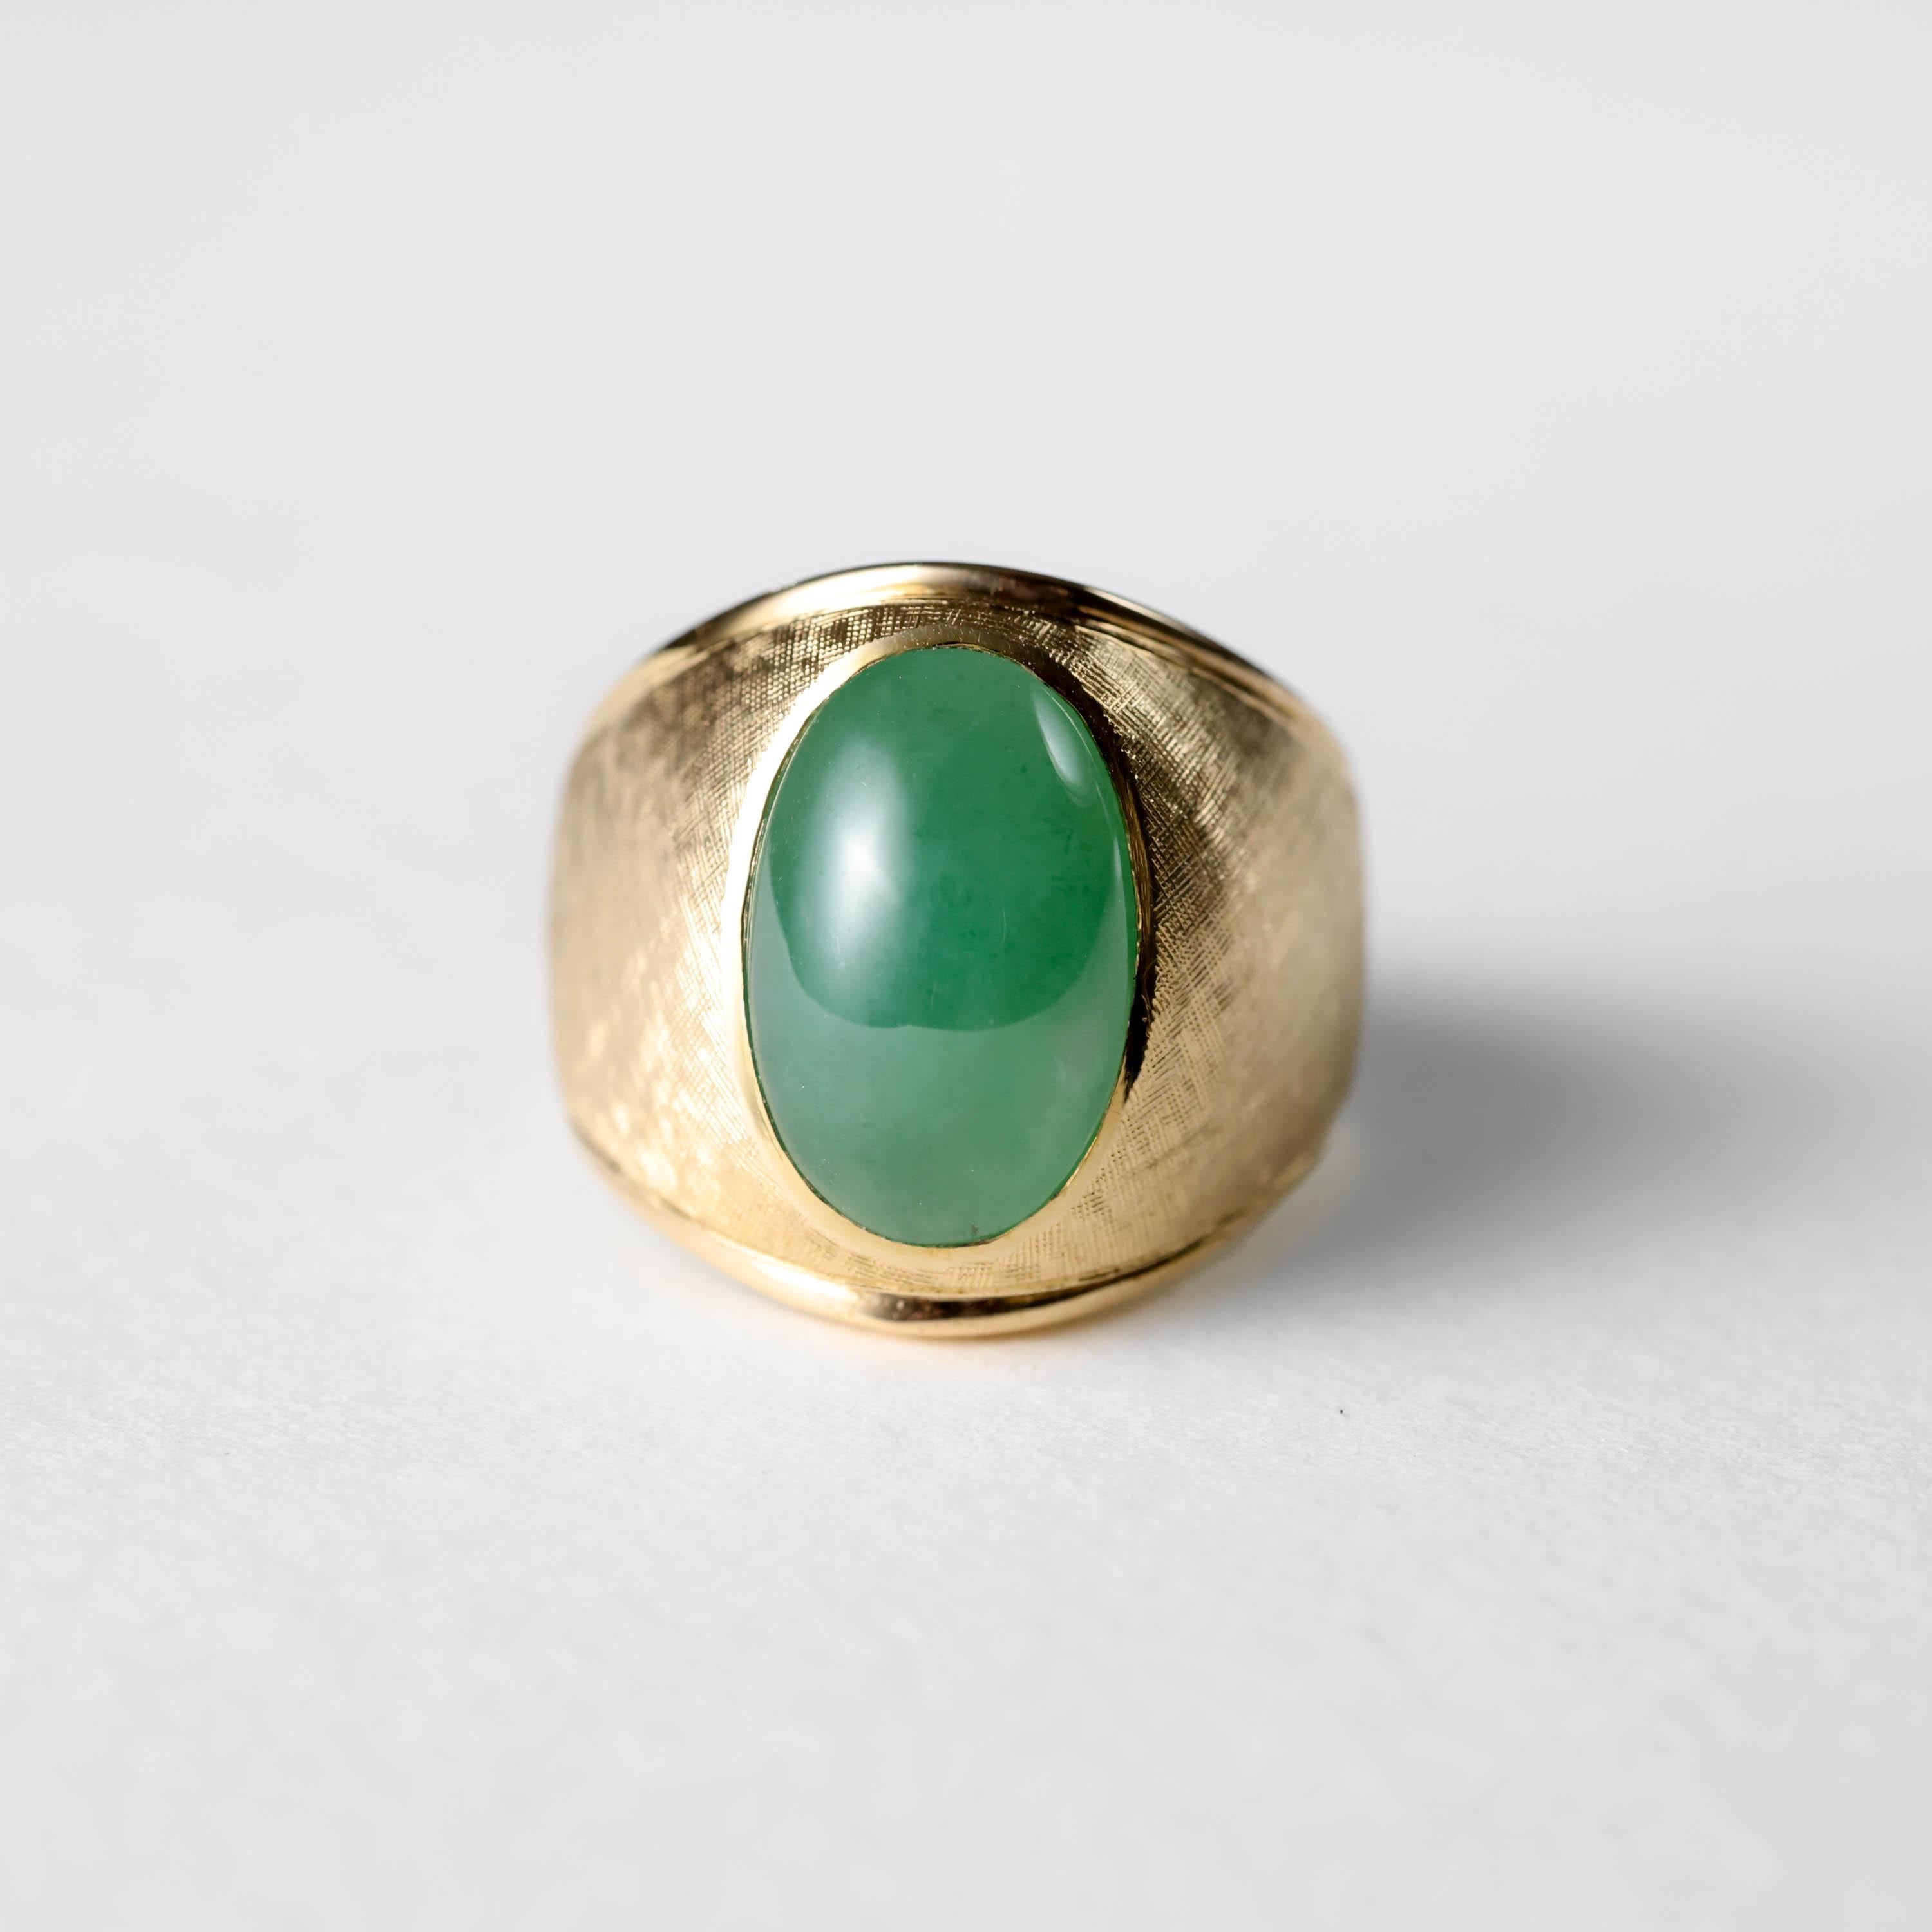 This men's jadeite jade ring represents old-school class: hand-fabricated in America in the 1960s, hand-crafted to perfection. 

It features a large double cabochon of highly translucent untreated Burmese jadeite jade bezel set into a spectacular